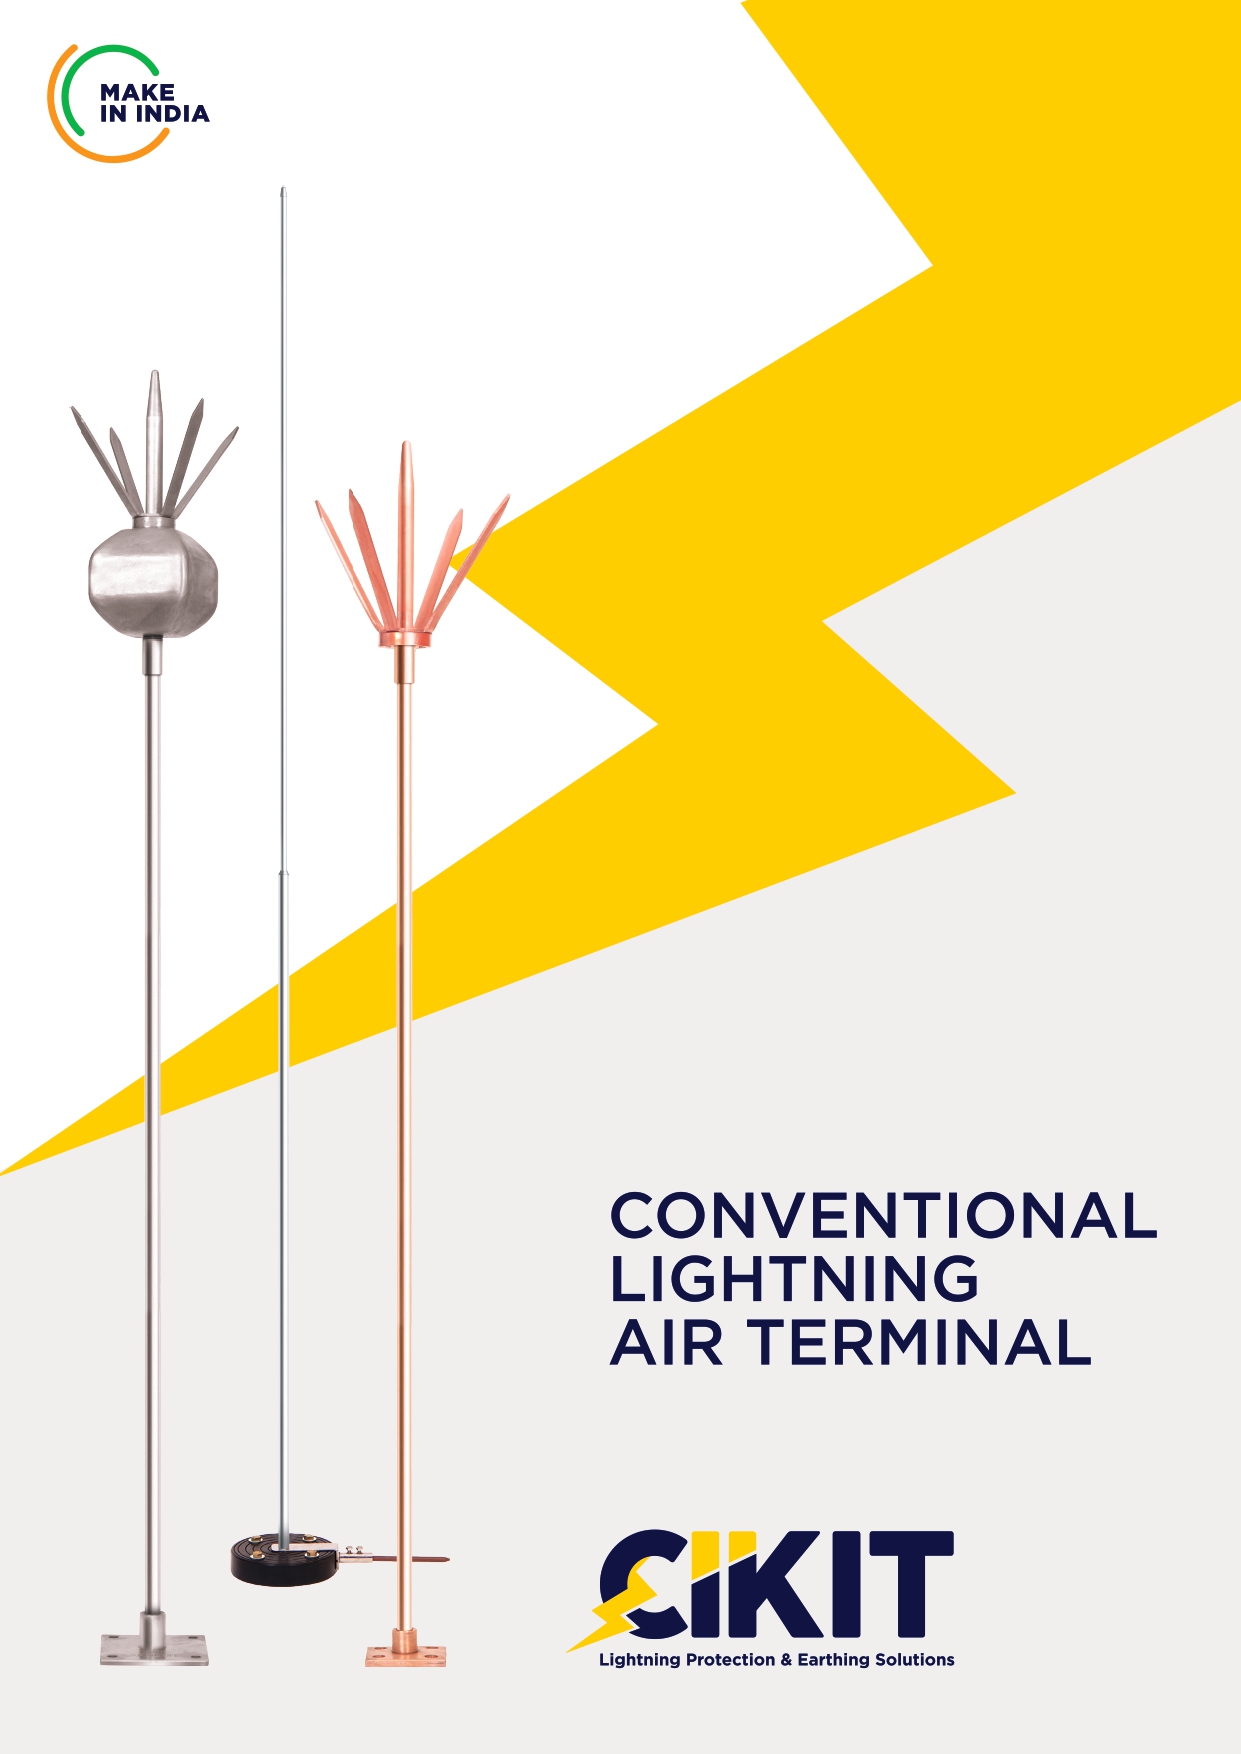 The cover image of the 'Conventional Lightning Air Terminal' product factsheet.